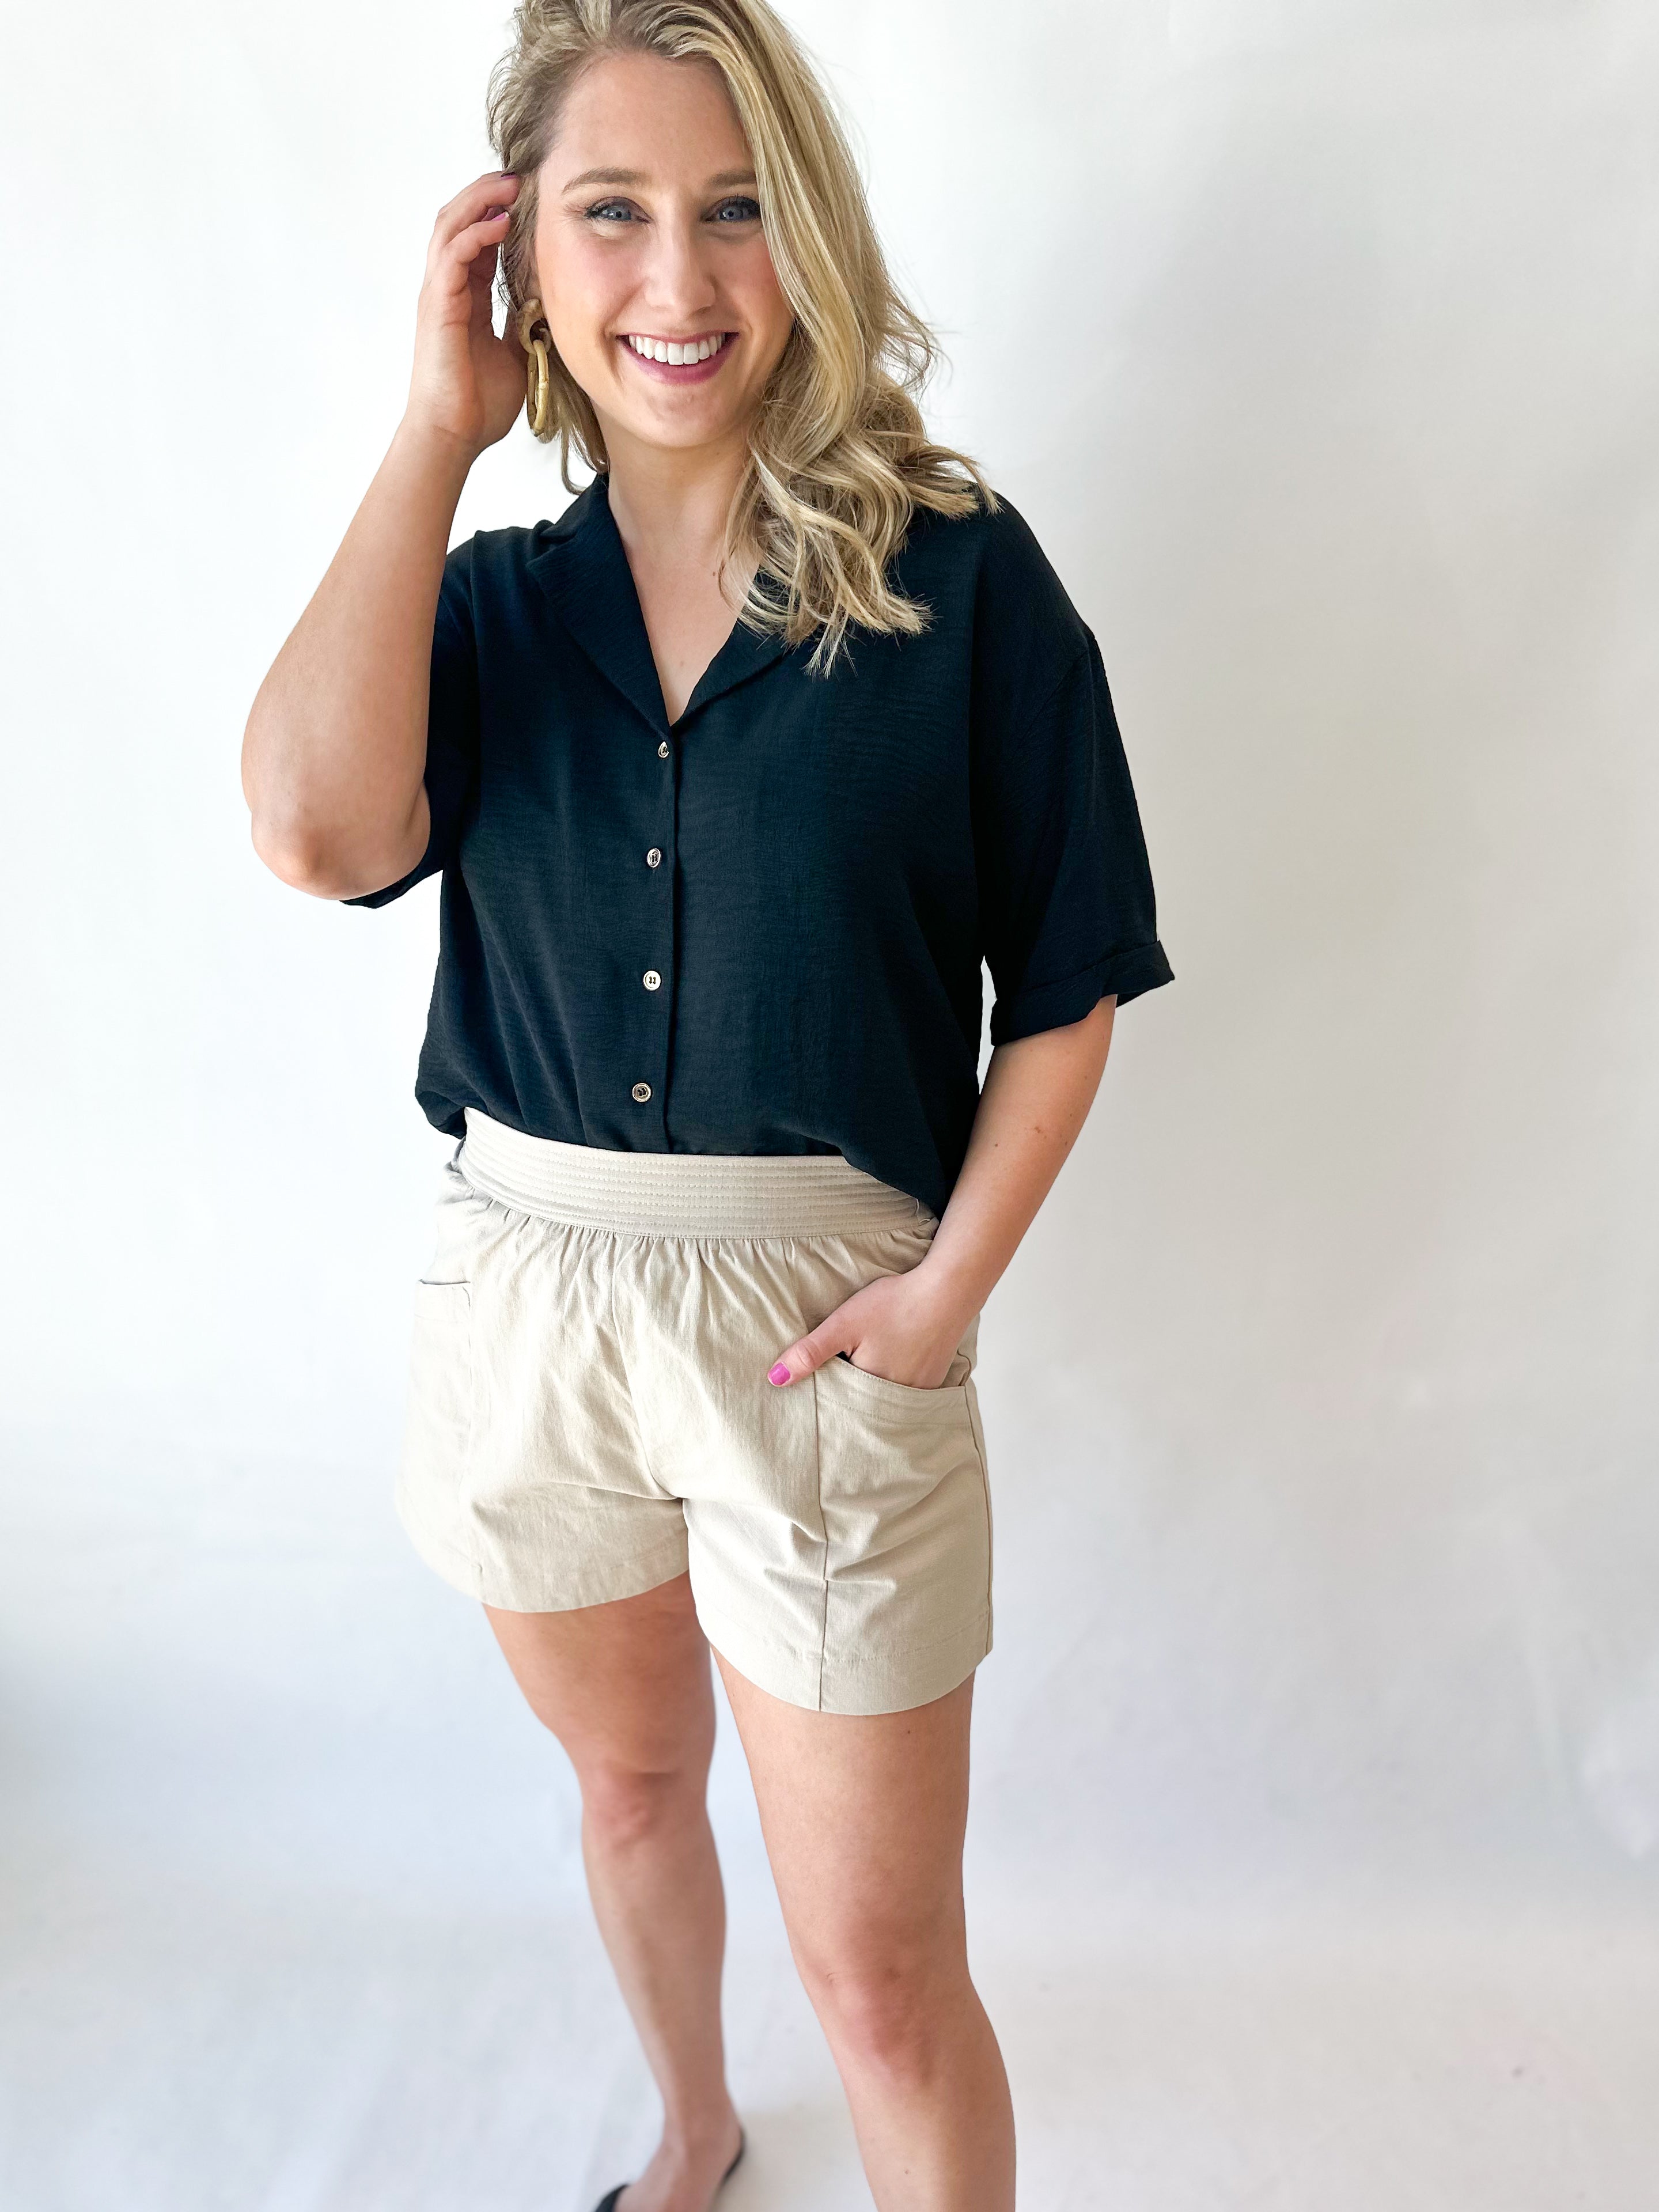 The Everyday Short - Tan-410 Shorts/Skirts-ENTRO-July & June Women's Fashion Boutique Located in San Antonio, Texas